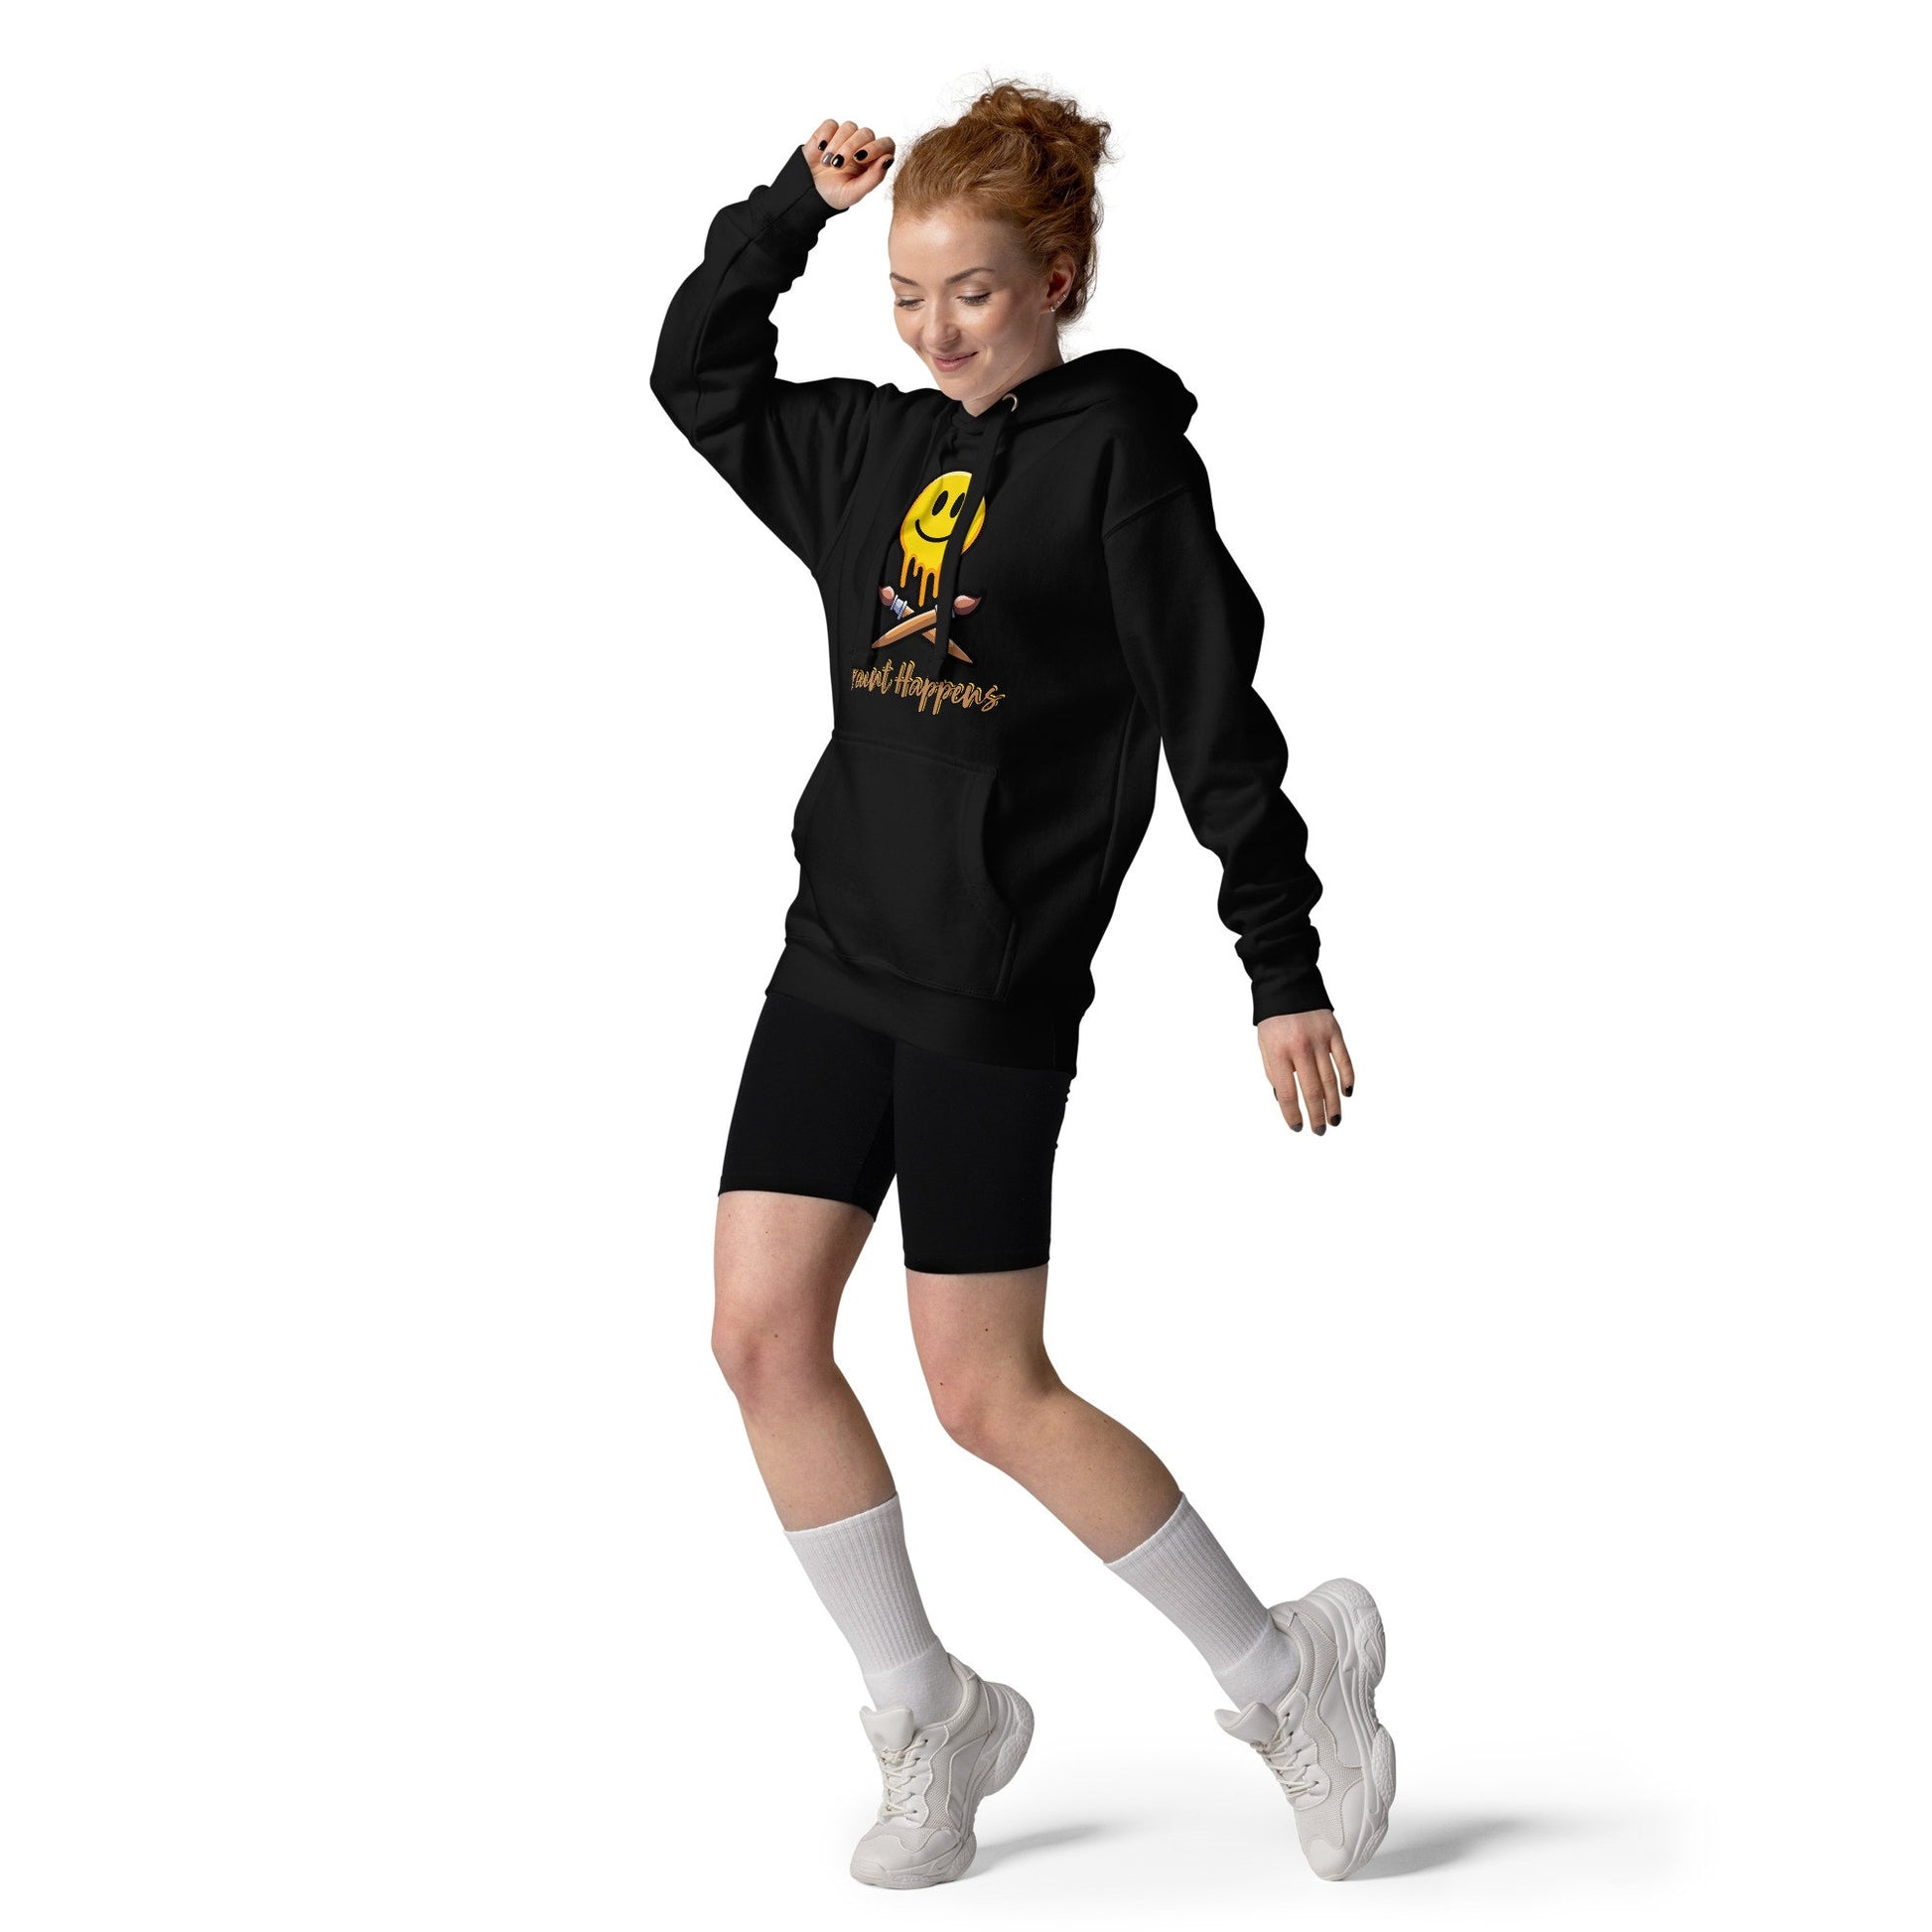 The Grinning Painter Unisex Hoodie